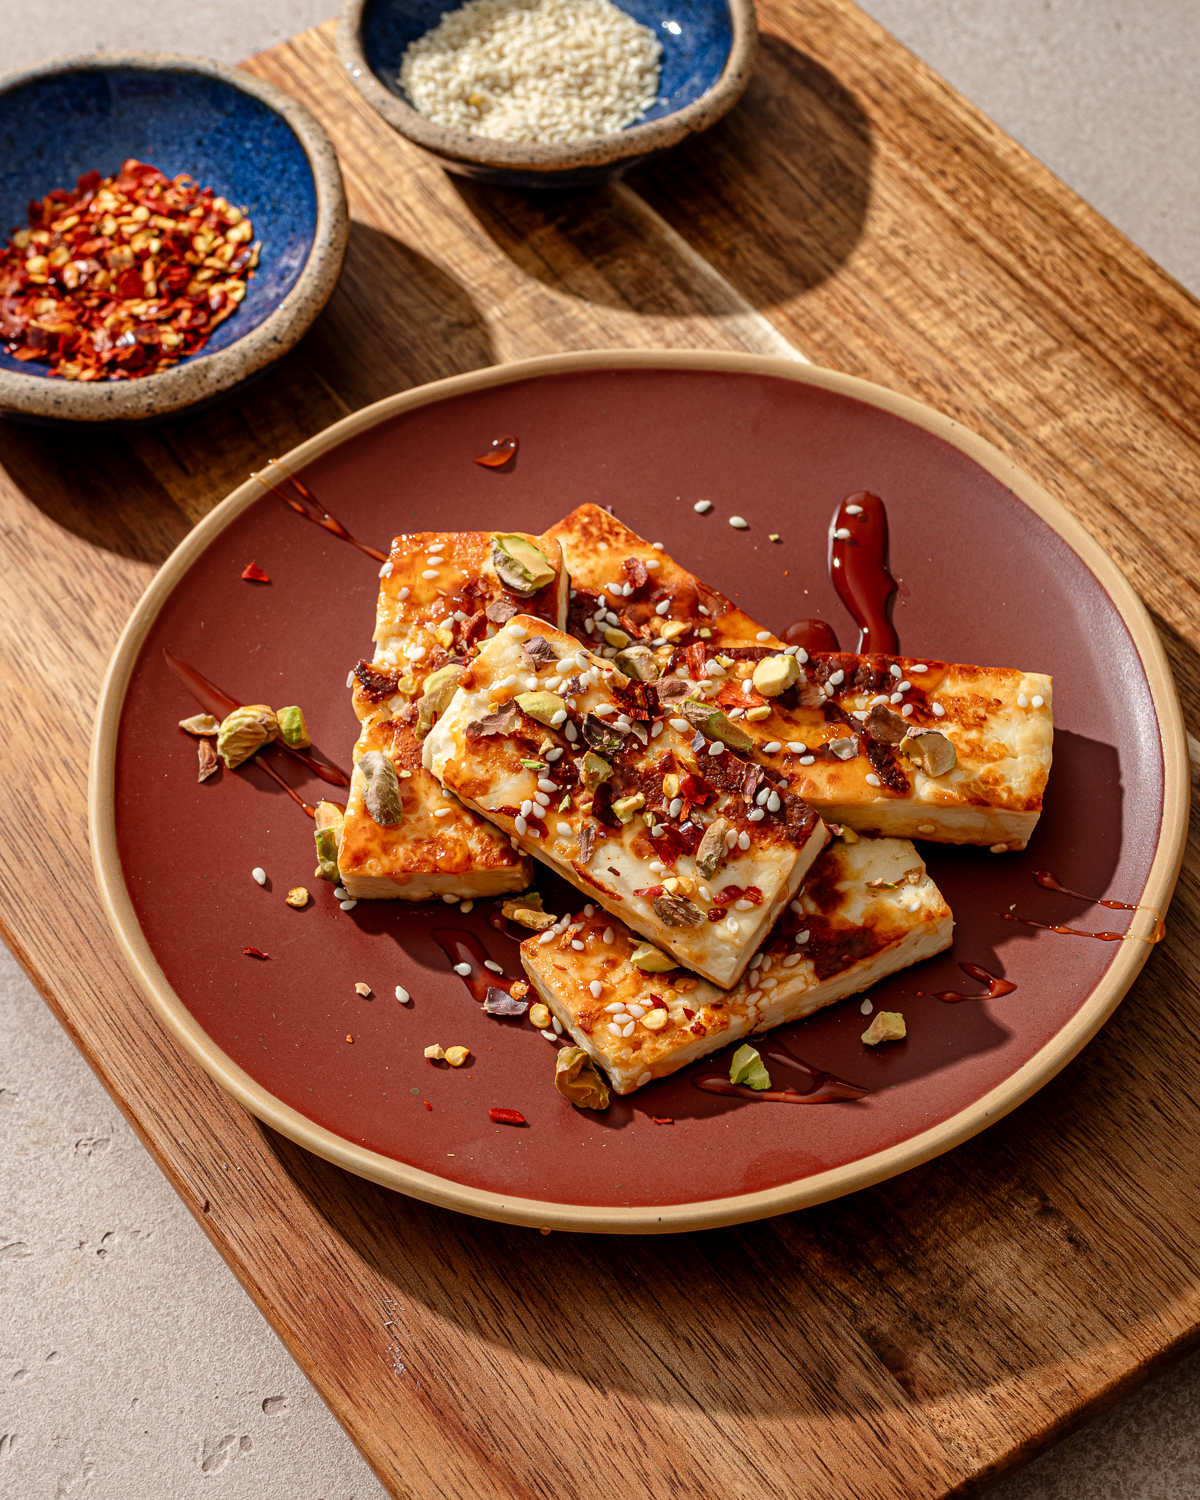 A serving of sweet chilli halloumi on a red plate over a wooden cutting board.